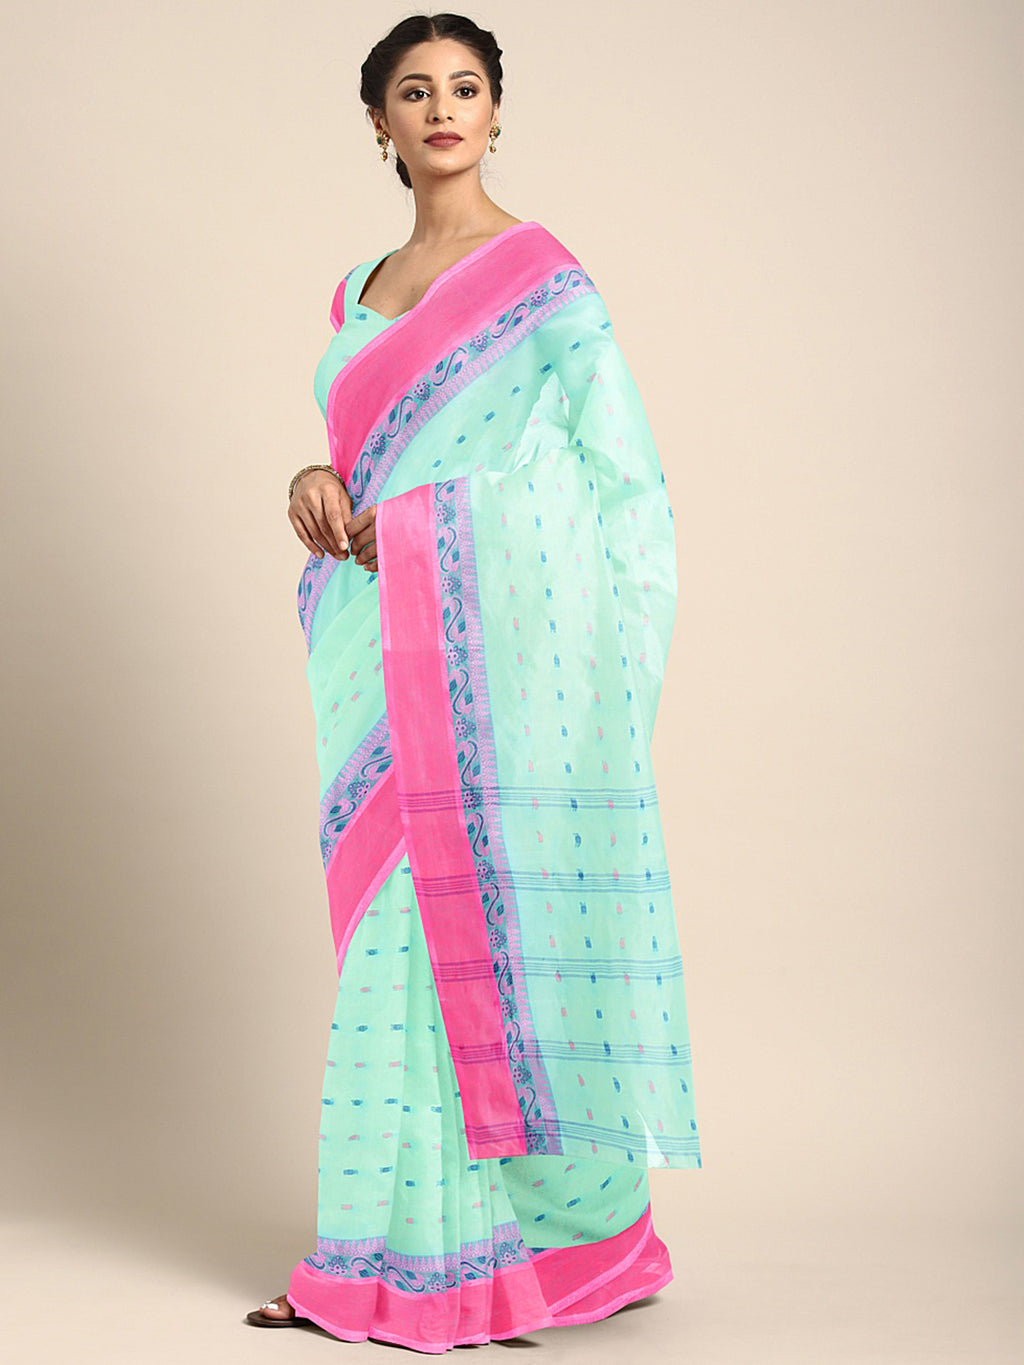 Blue Tant Woven Design Saree Without Blouse Piece DUTASA022 DUTASA022-Saree-Kalakari India-DUTASA022-Geographical Indication, Hand Crafted, Heritage Prints, Natural Dyes, Sarees, Silk Cotton, Sustainable Fabrics, Taant, Tant, West Bengal, Woven-[Linen,Ethnic,wear,Fashionista,Handloom,Handicraft,Indigo,blockprint,block,print,Cotton,Chanderi,Blue, latest,classy,party,bollywood,trendy,summer,style,traditional,formal,elegant,unique,style,hand,block,print, dabu,booti,gift,present,glamorous,affordable